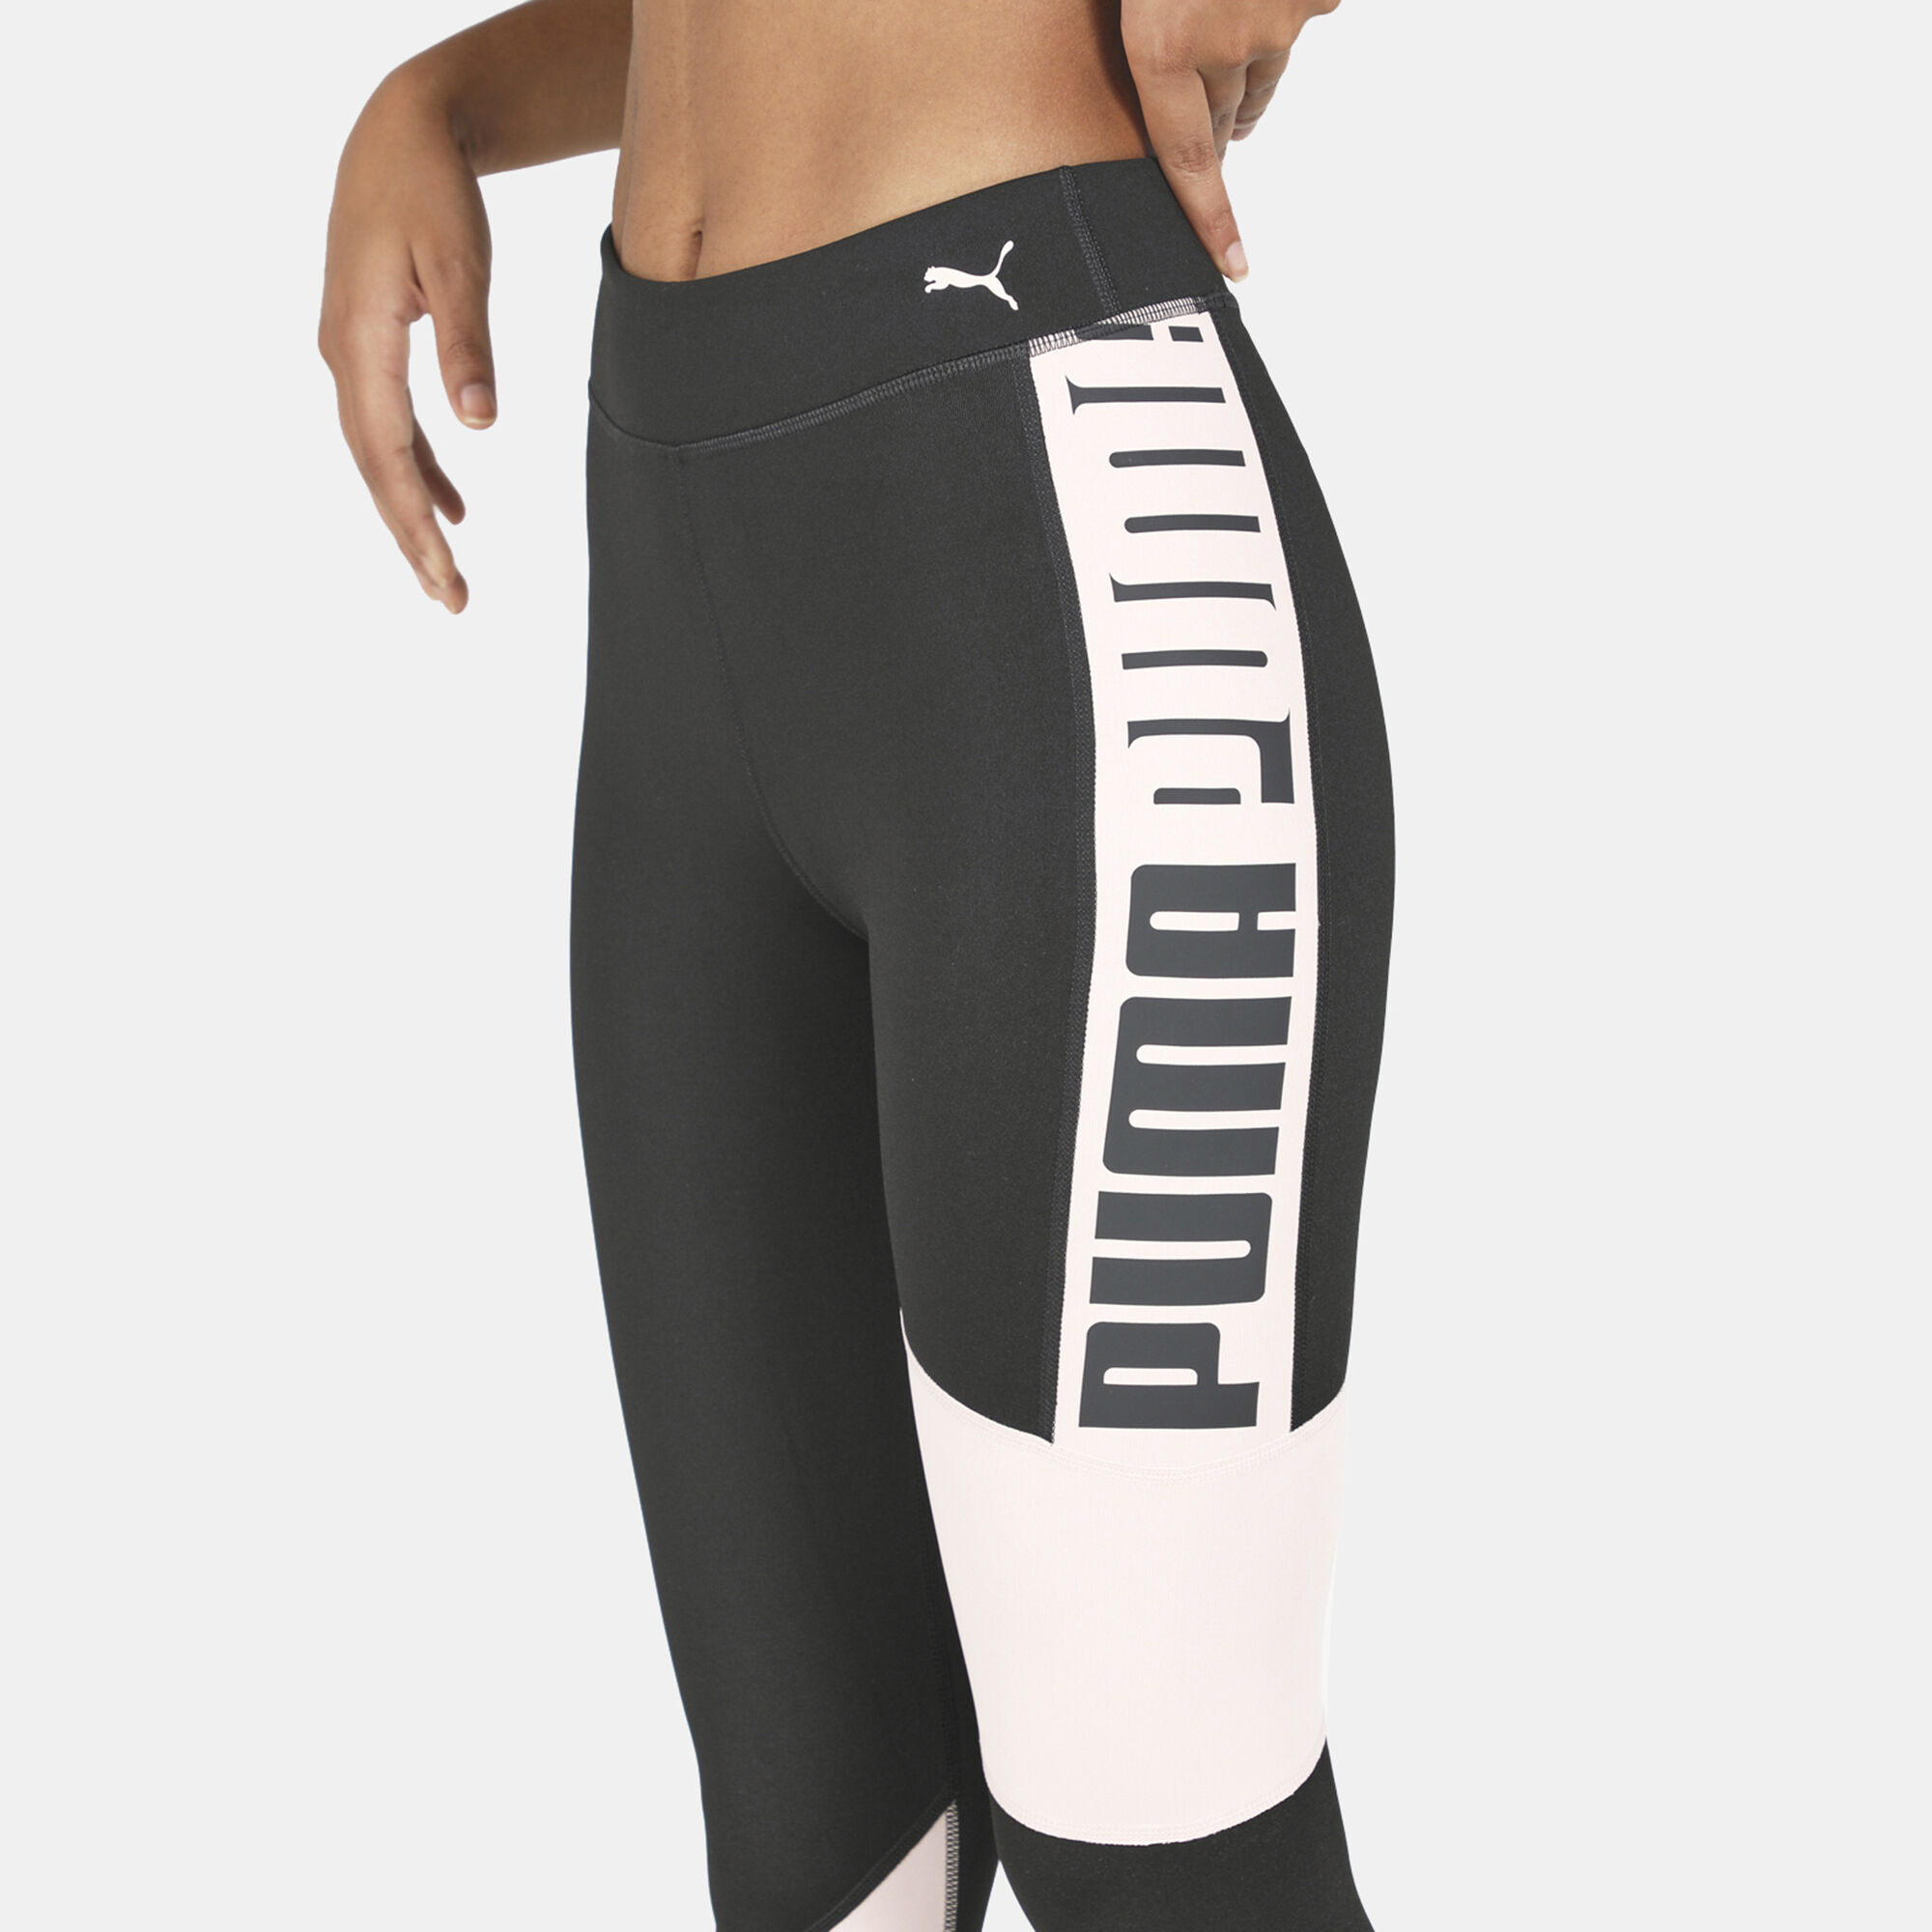 Turn heads in the gym or on the street in the hottest PUMA leggings. | Ropa  deportiva, Ropa deportiva mujer, Trajes deportivos